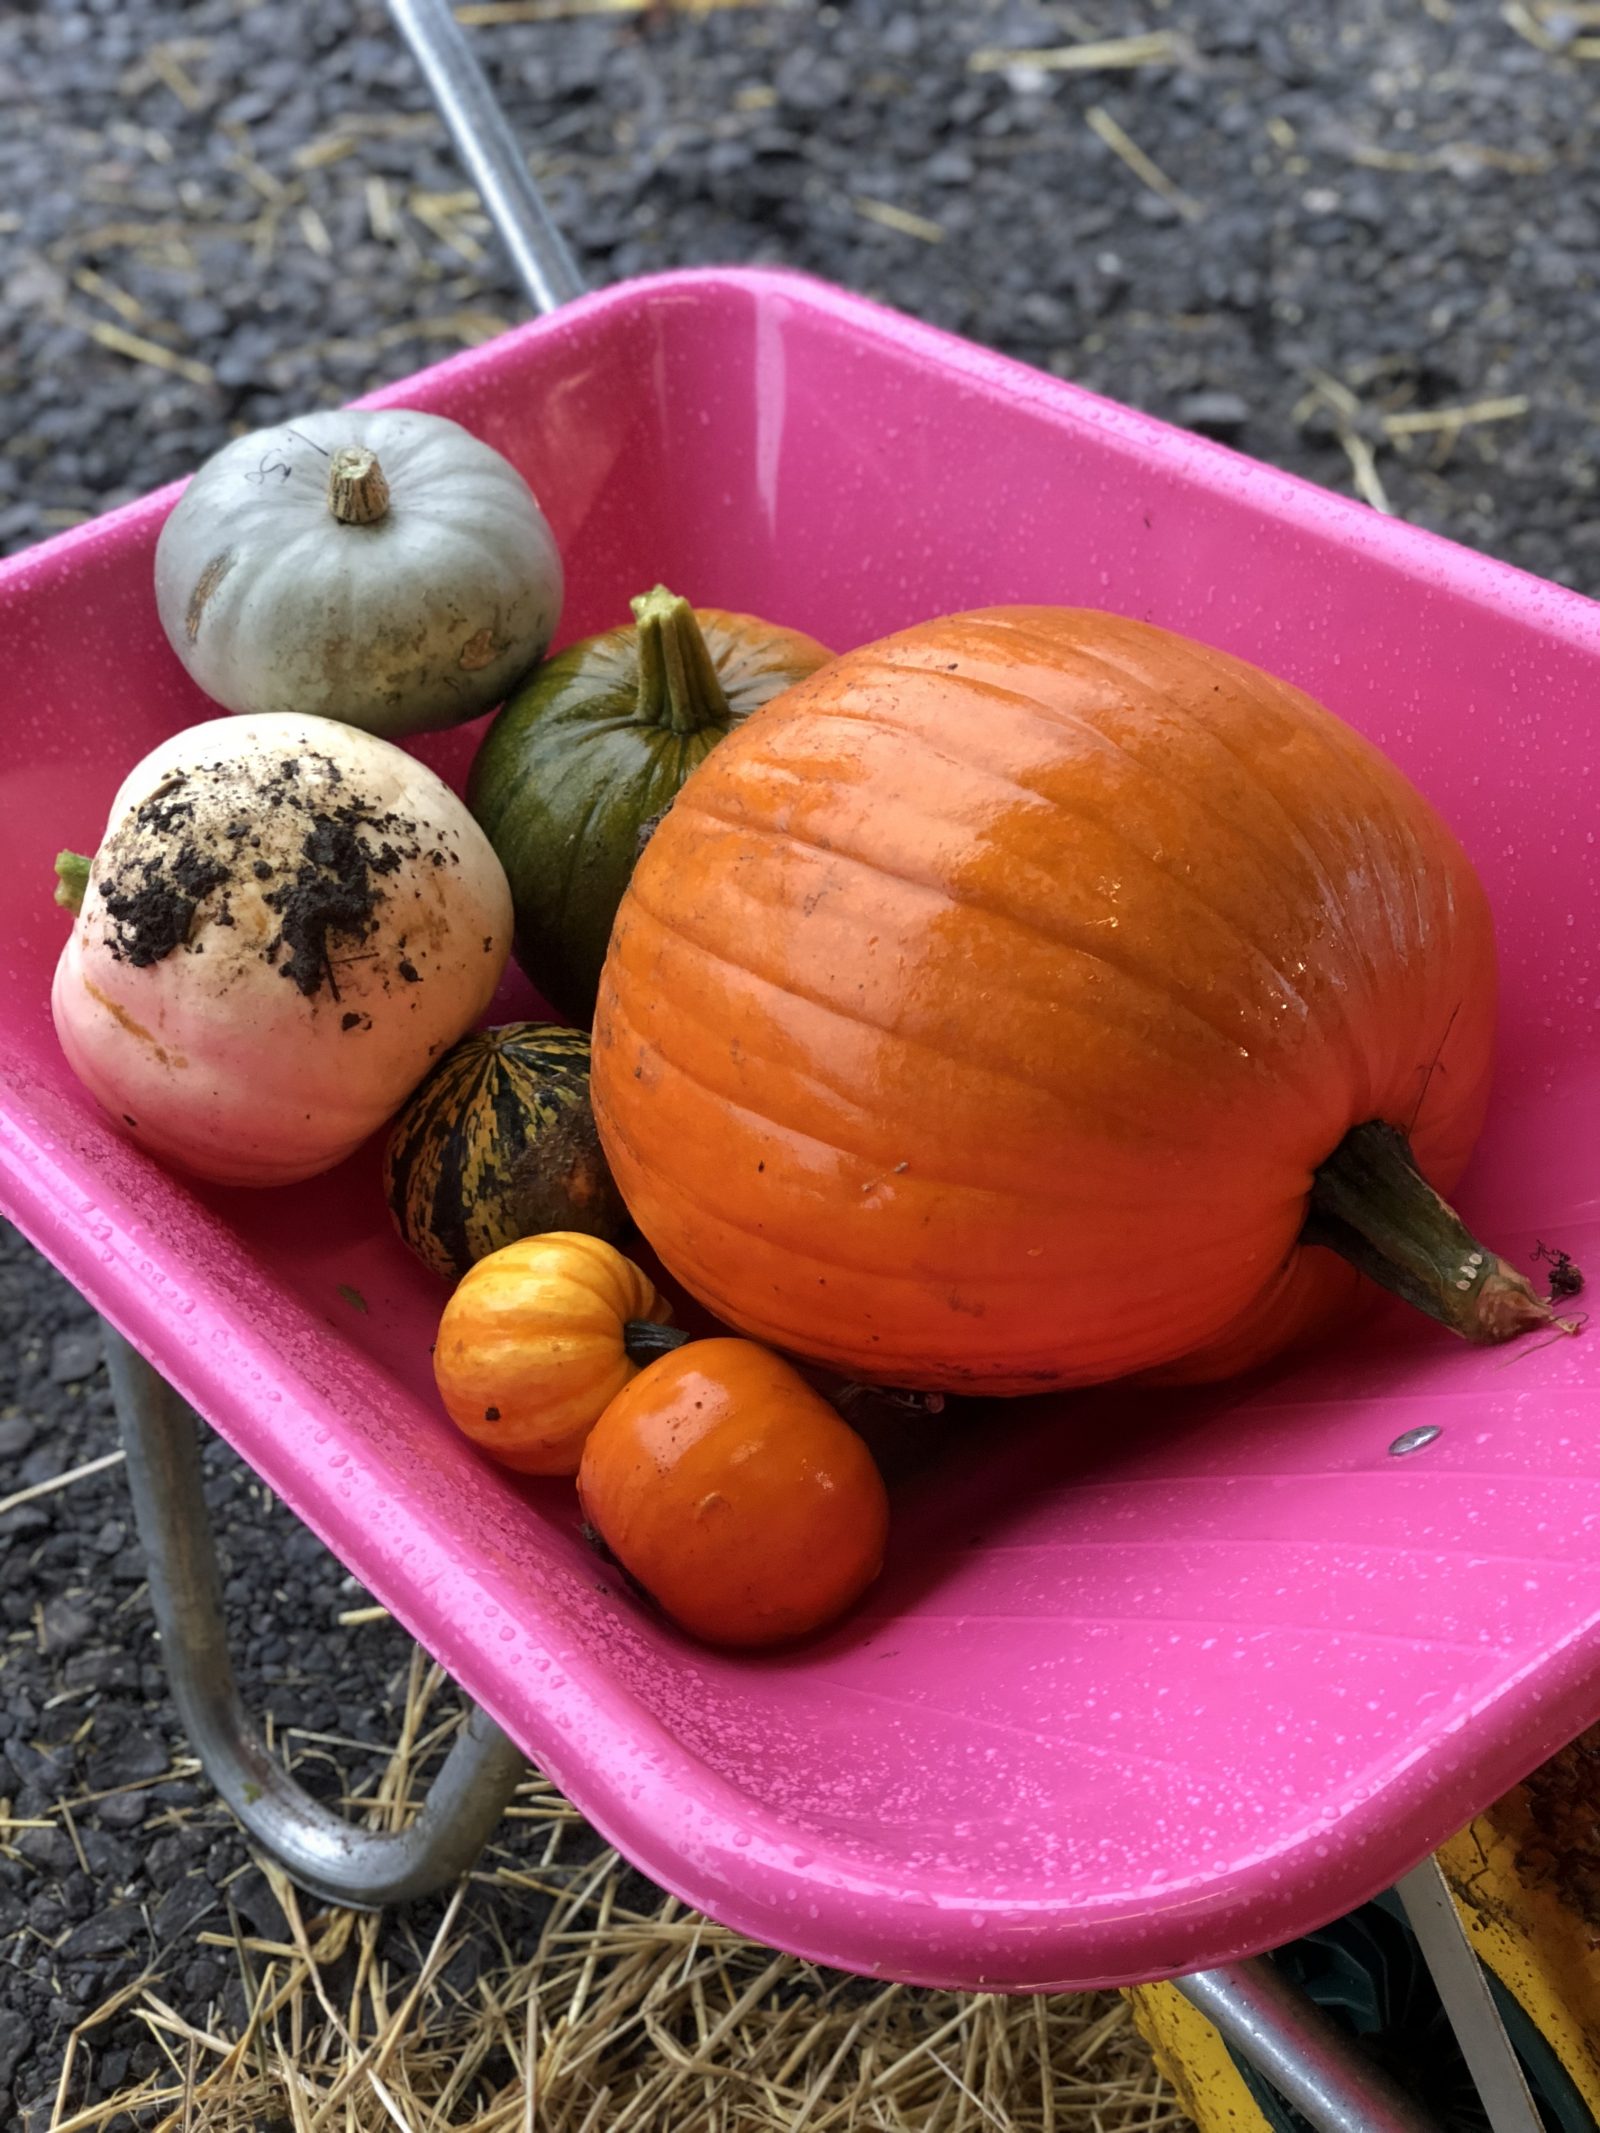 Pumpkin Picking, pumpkin patch, pumpkins, day in the Life, Penyfodau Fawr Farm, pick your own, memories, days out, family days out, south wales, Swansea, dear diary, autumn, 